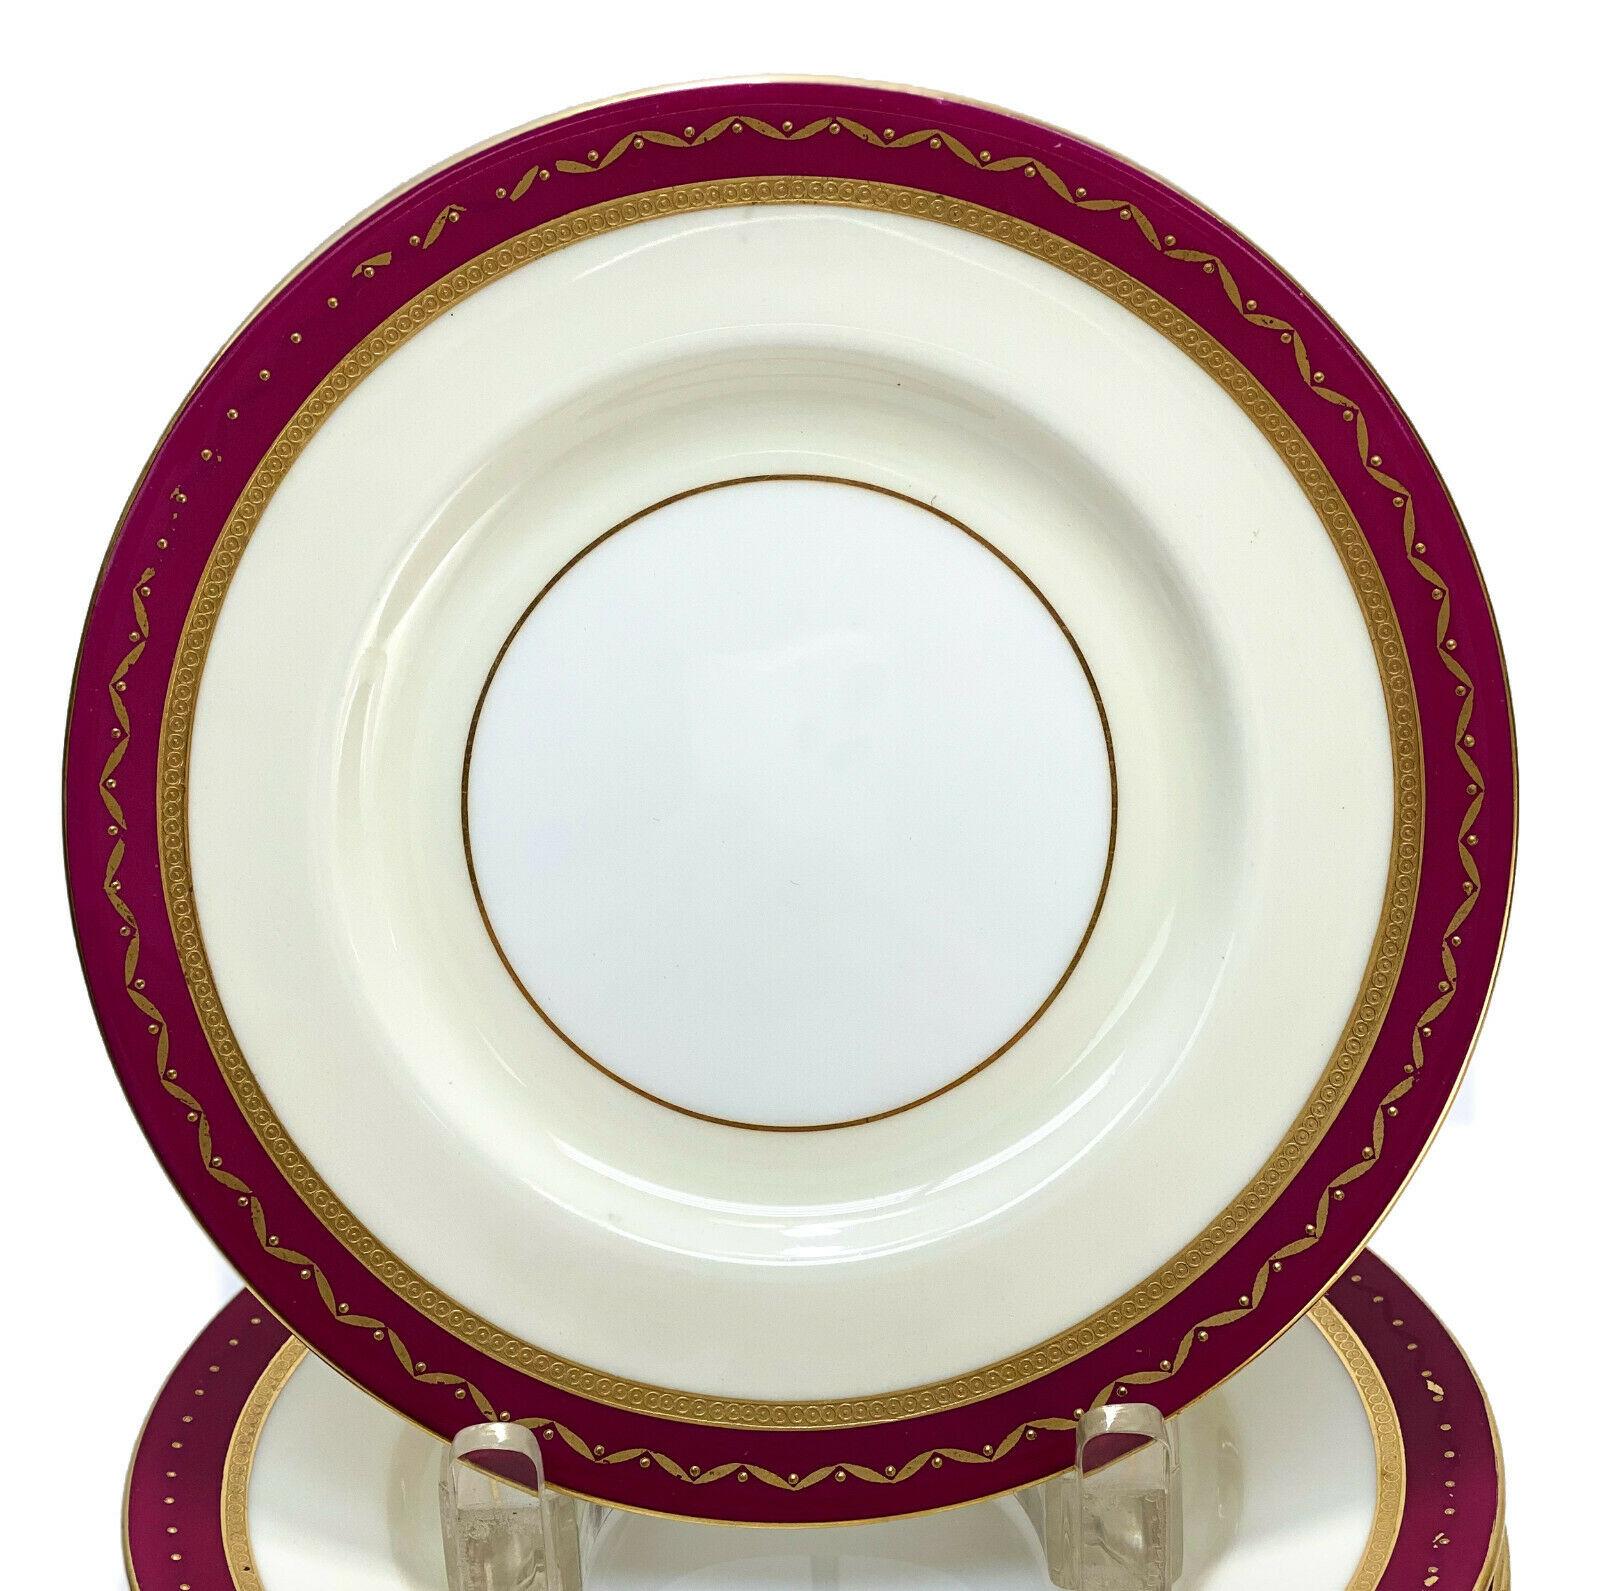 12 Minton England for Tiffany & Co. porcelain 7.75 inch dessert plates, c1900

A burgundy red ground to the trim with gilt swags and beaded accents. Minton England Tiffany mark to the underside base.

Additional Information:
Type: Dessert Plate